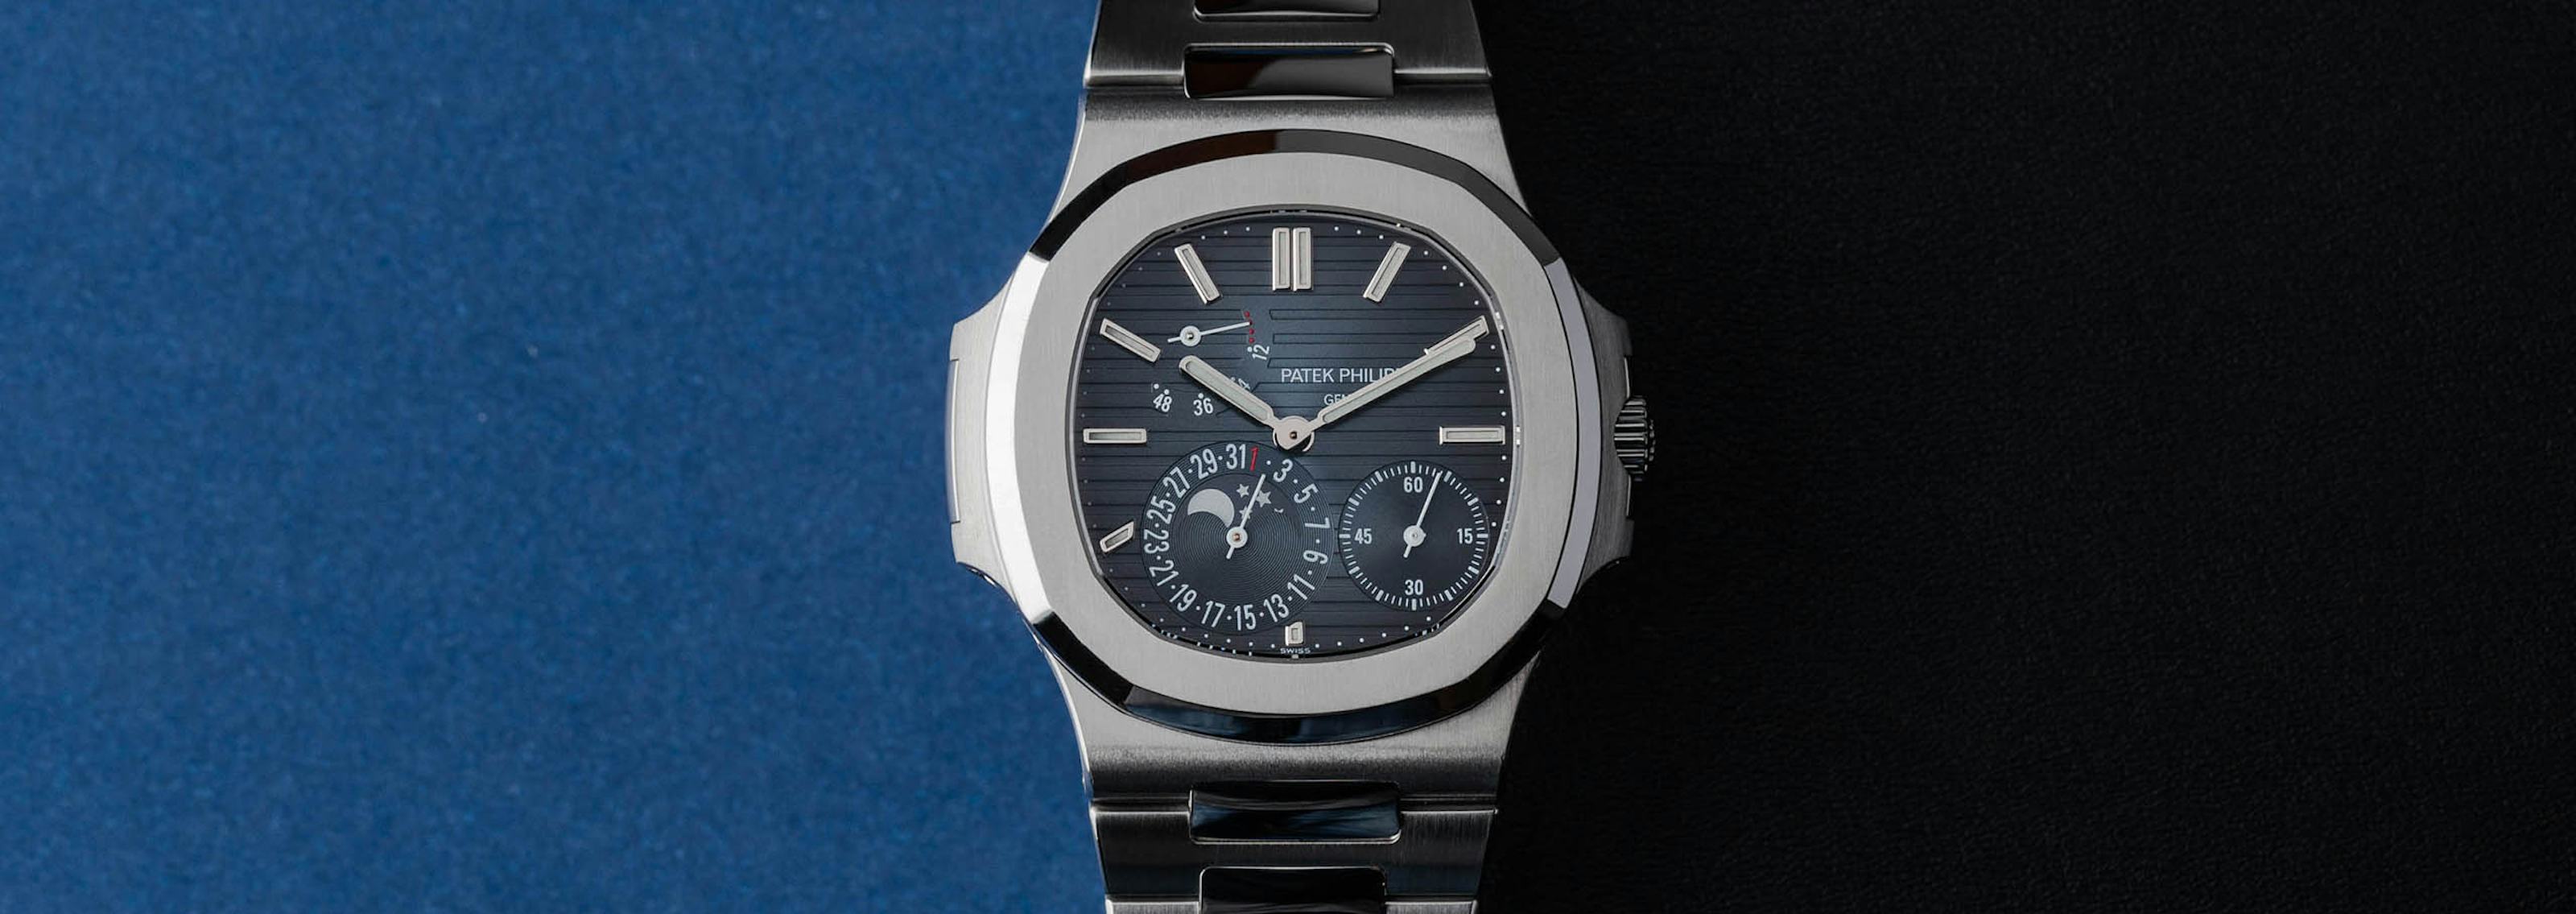 Everything You Need to Know About the Patek Philippe Nautilus